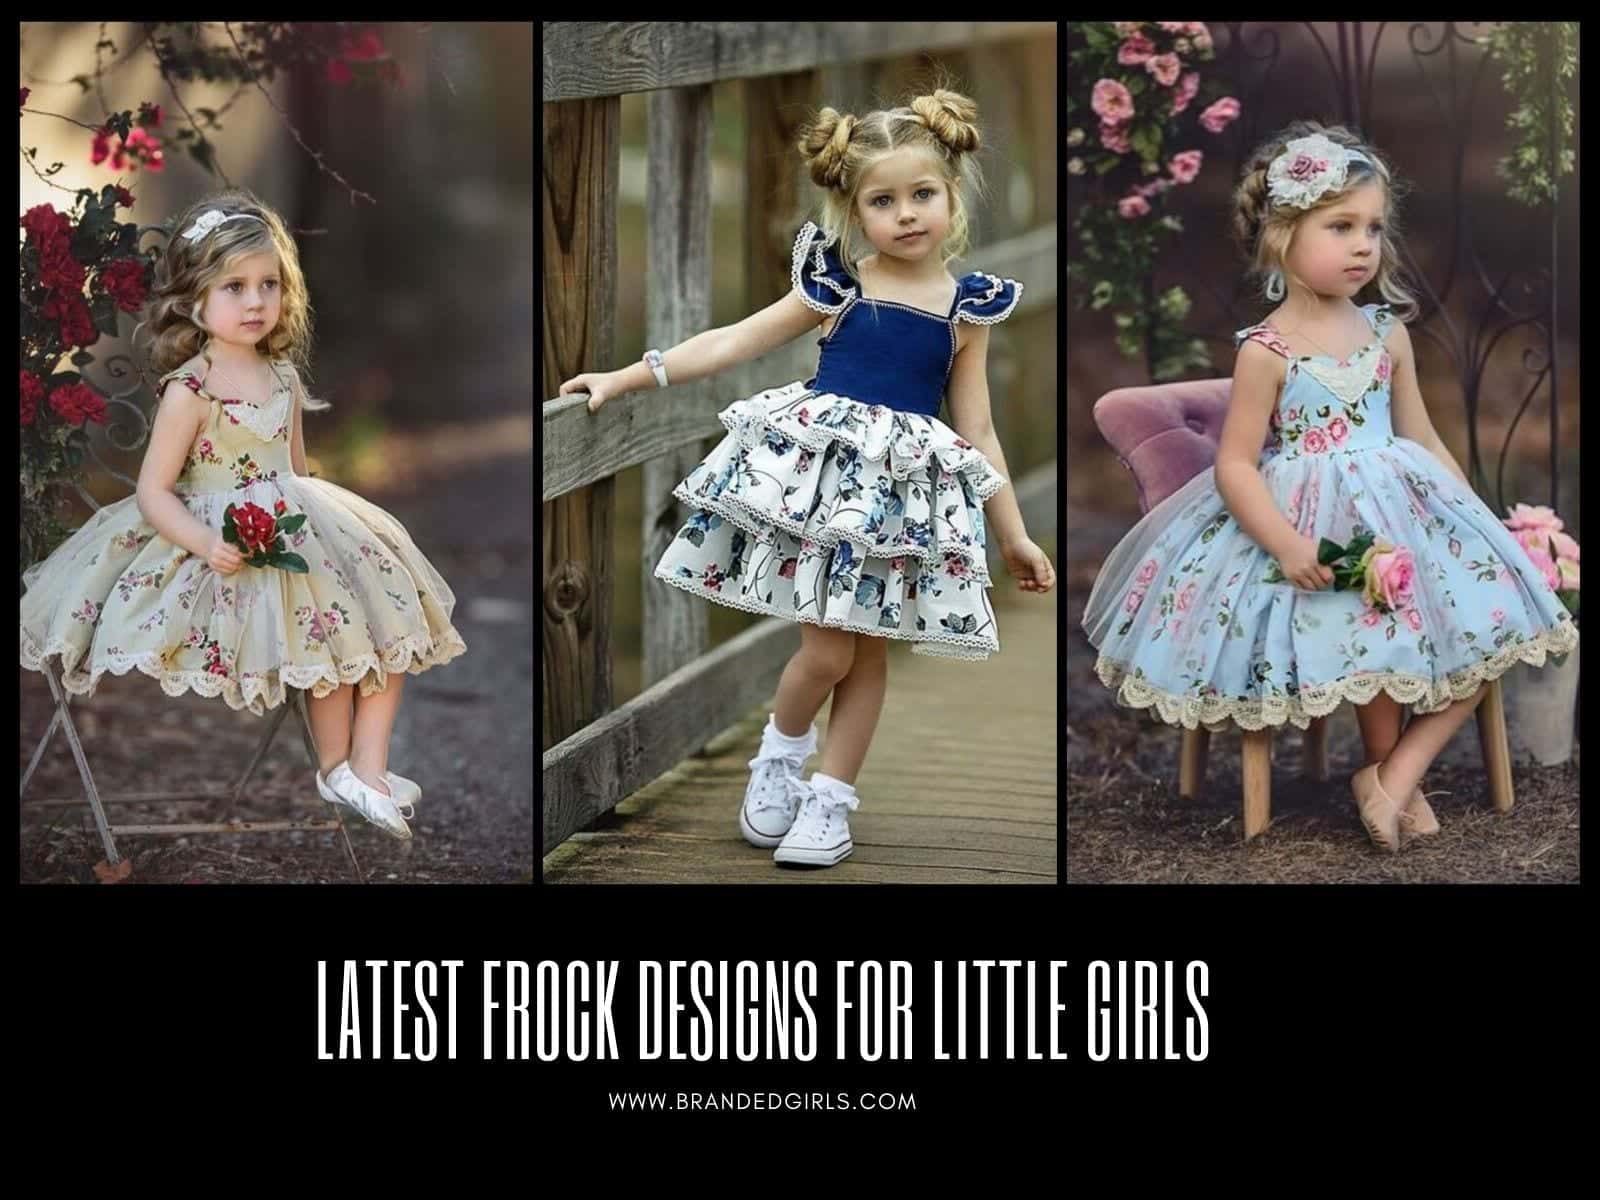 17 Most Adorable Frock Designs for Little Girls & Toddlers